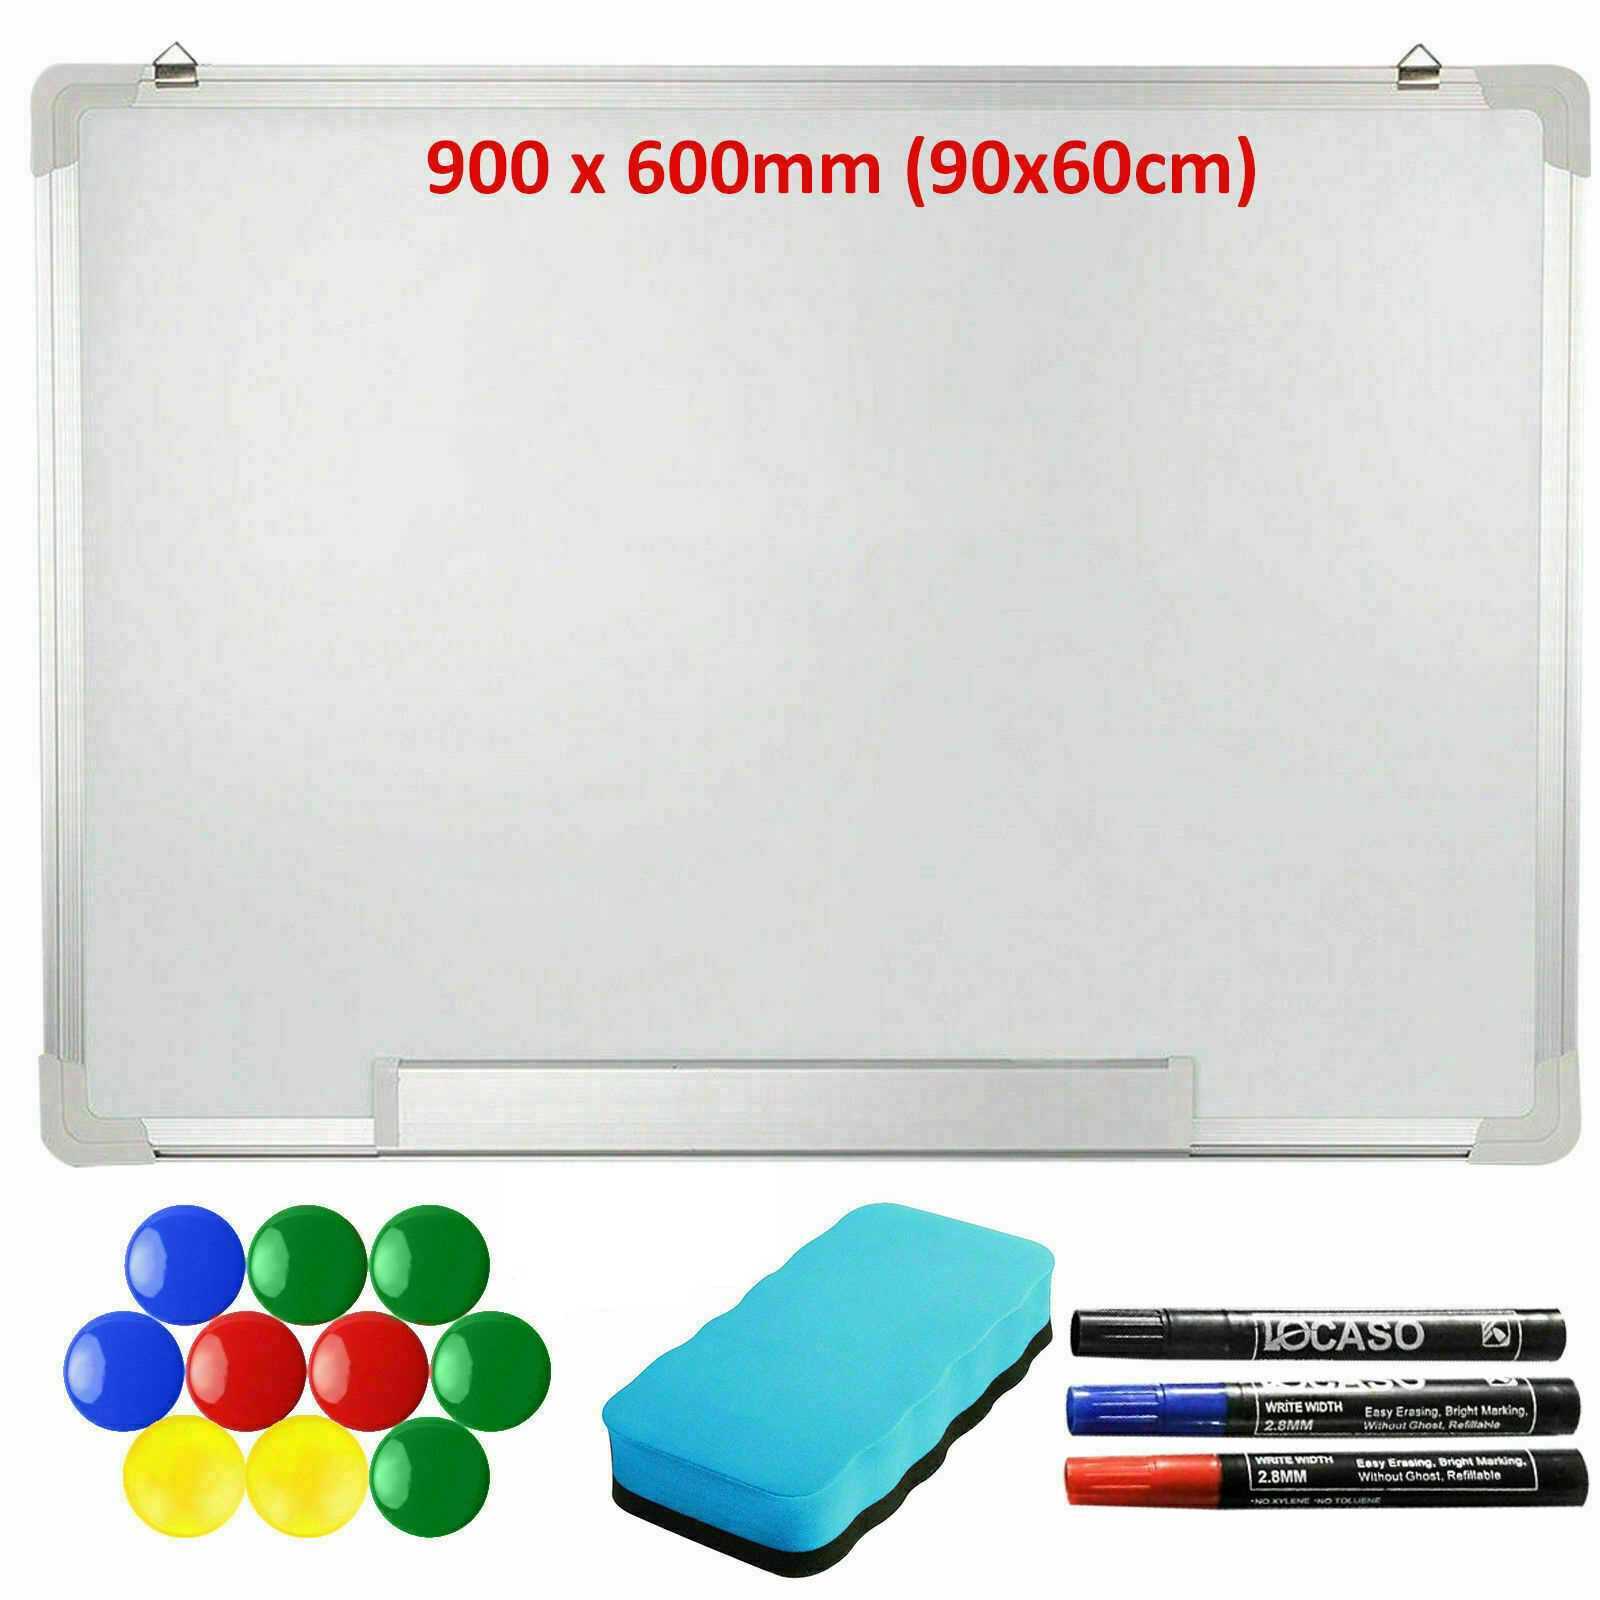 900 x 600mm Magnetic Whiteboard Small Large White Board Dry Wipe Office Home School Notice